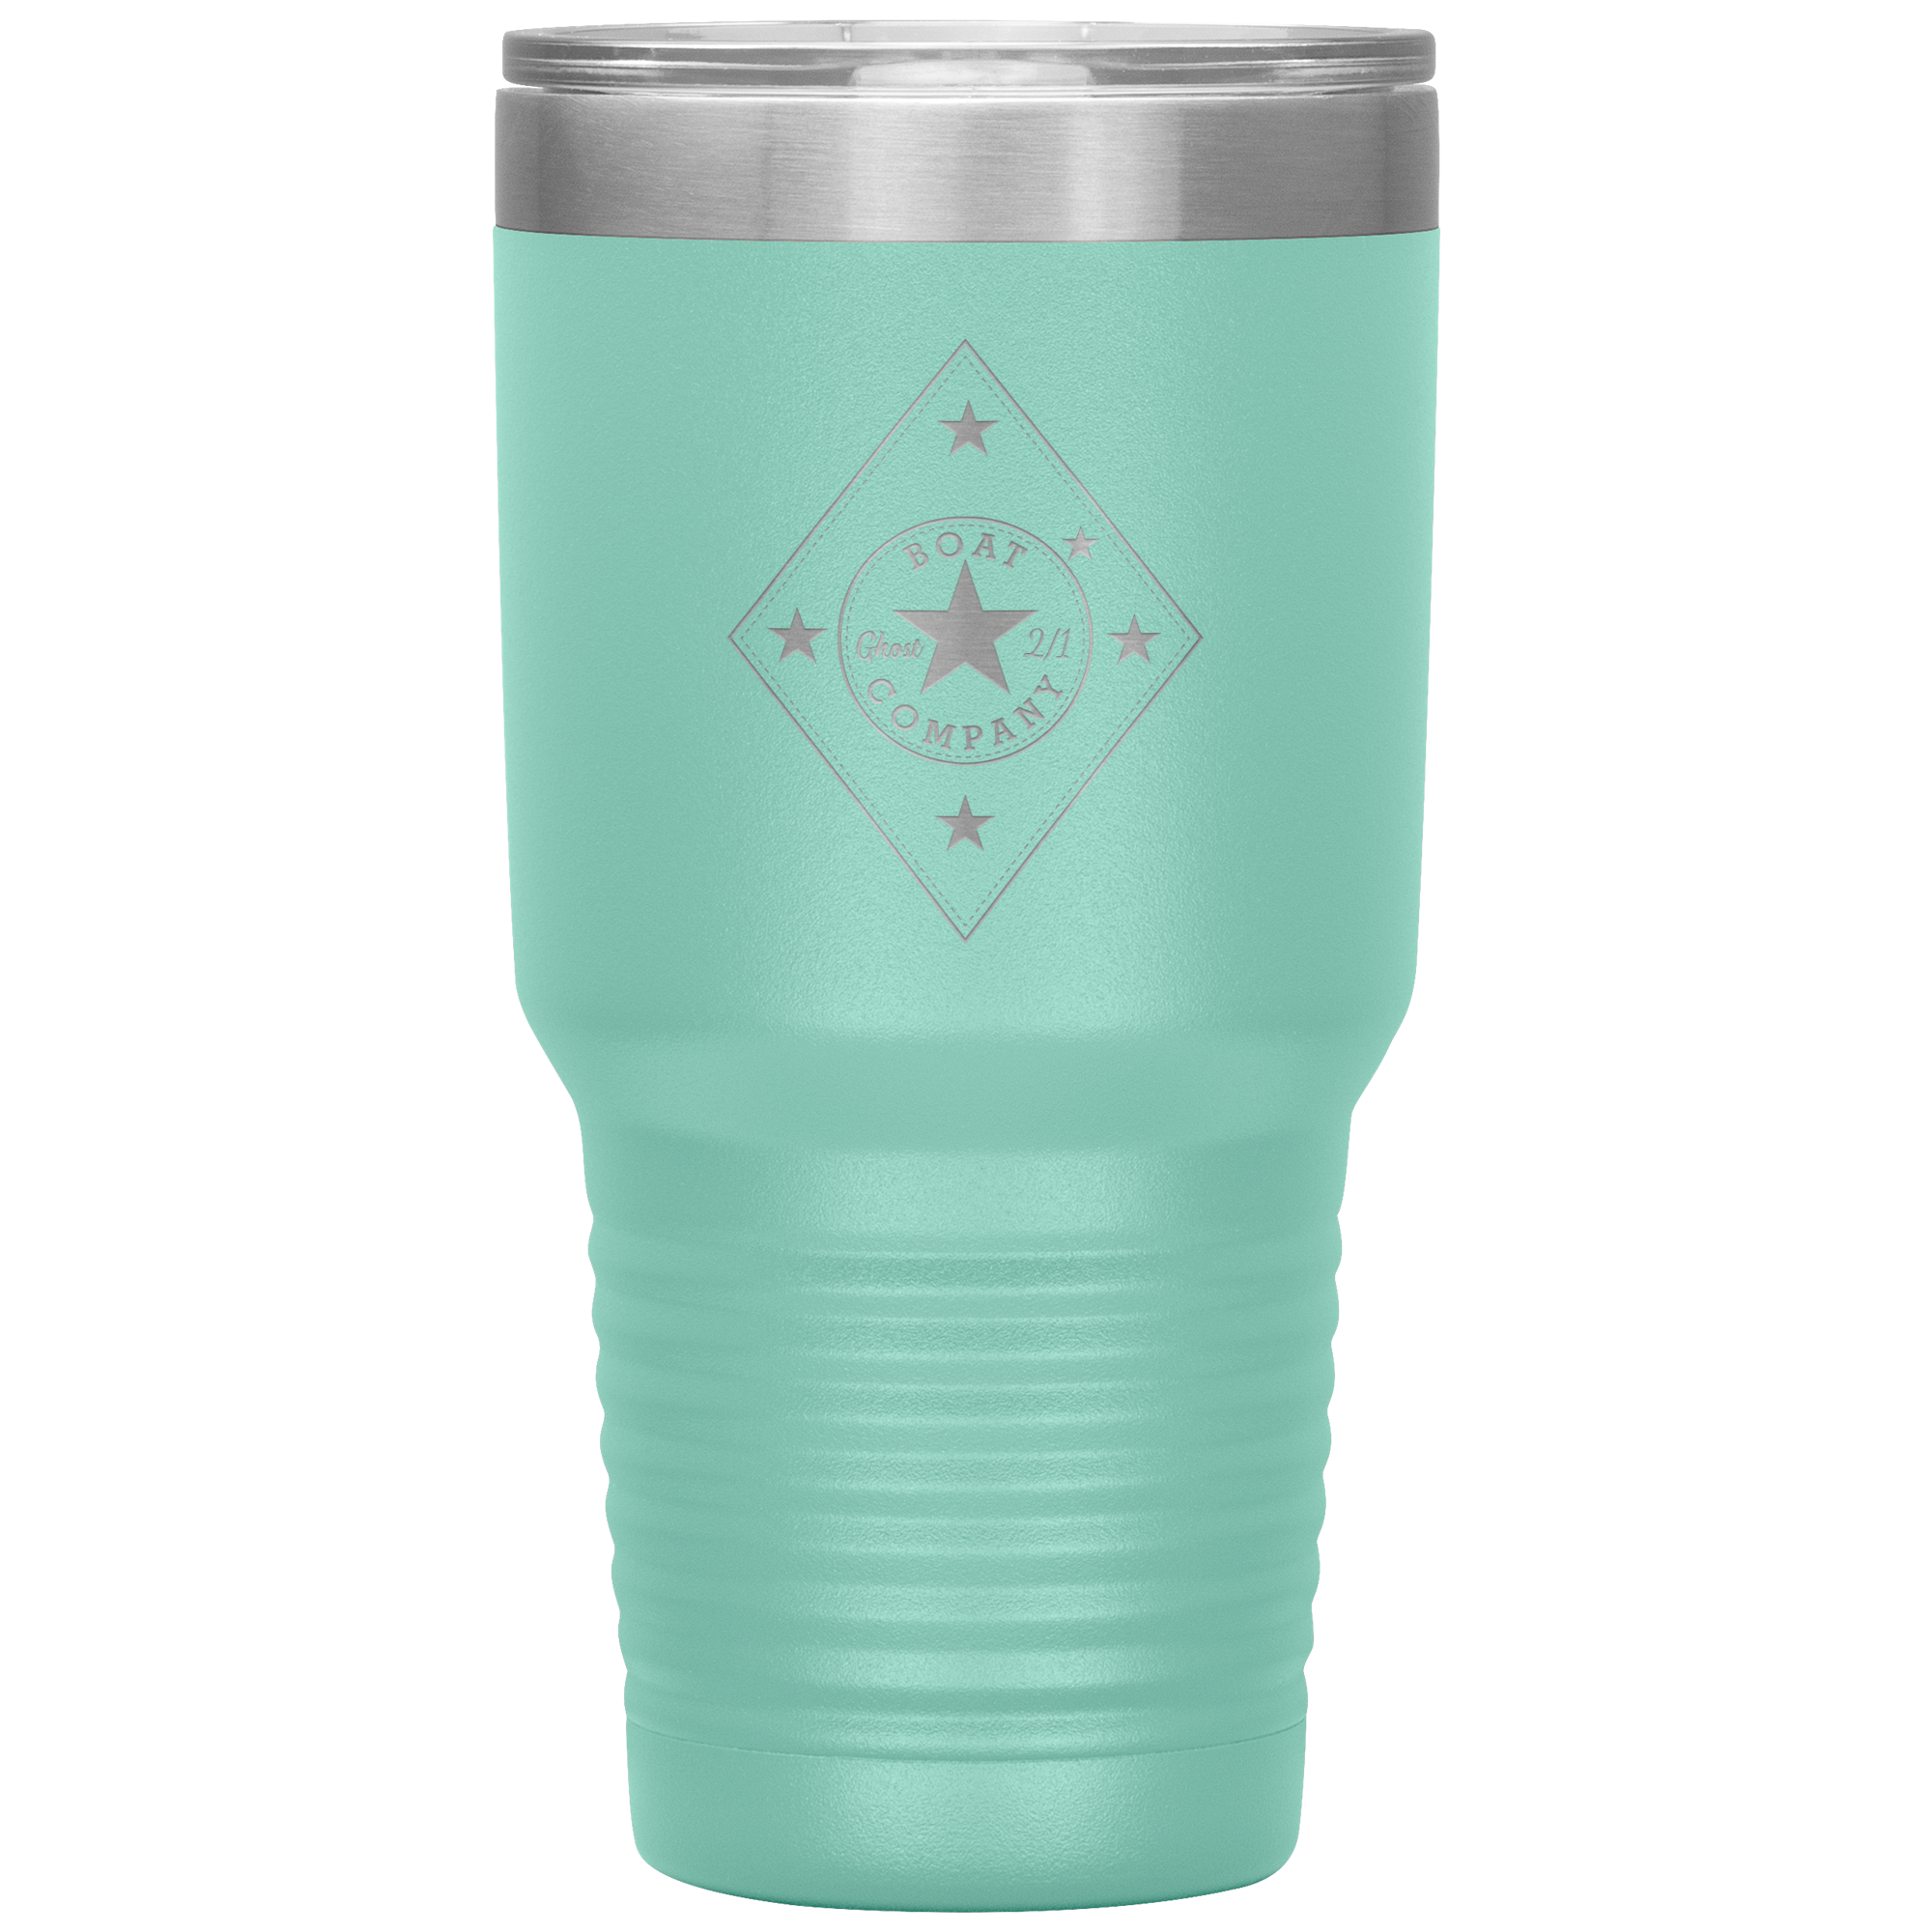 GHOST CO 2ND BN 1ST MARINES 30 oz TUMBLER